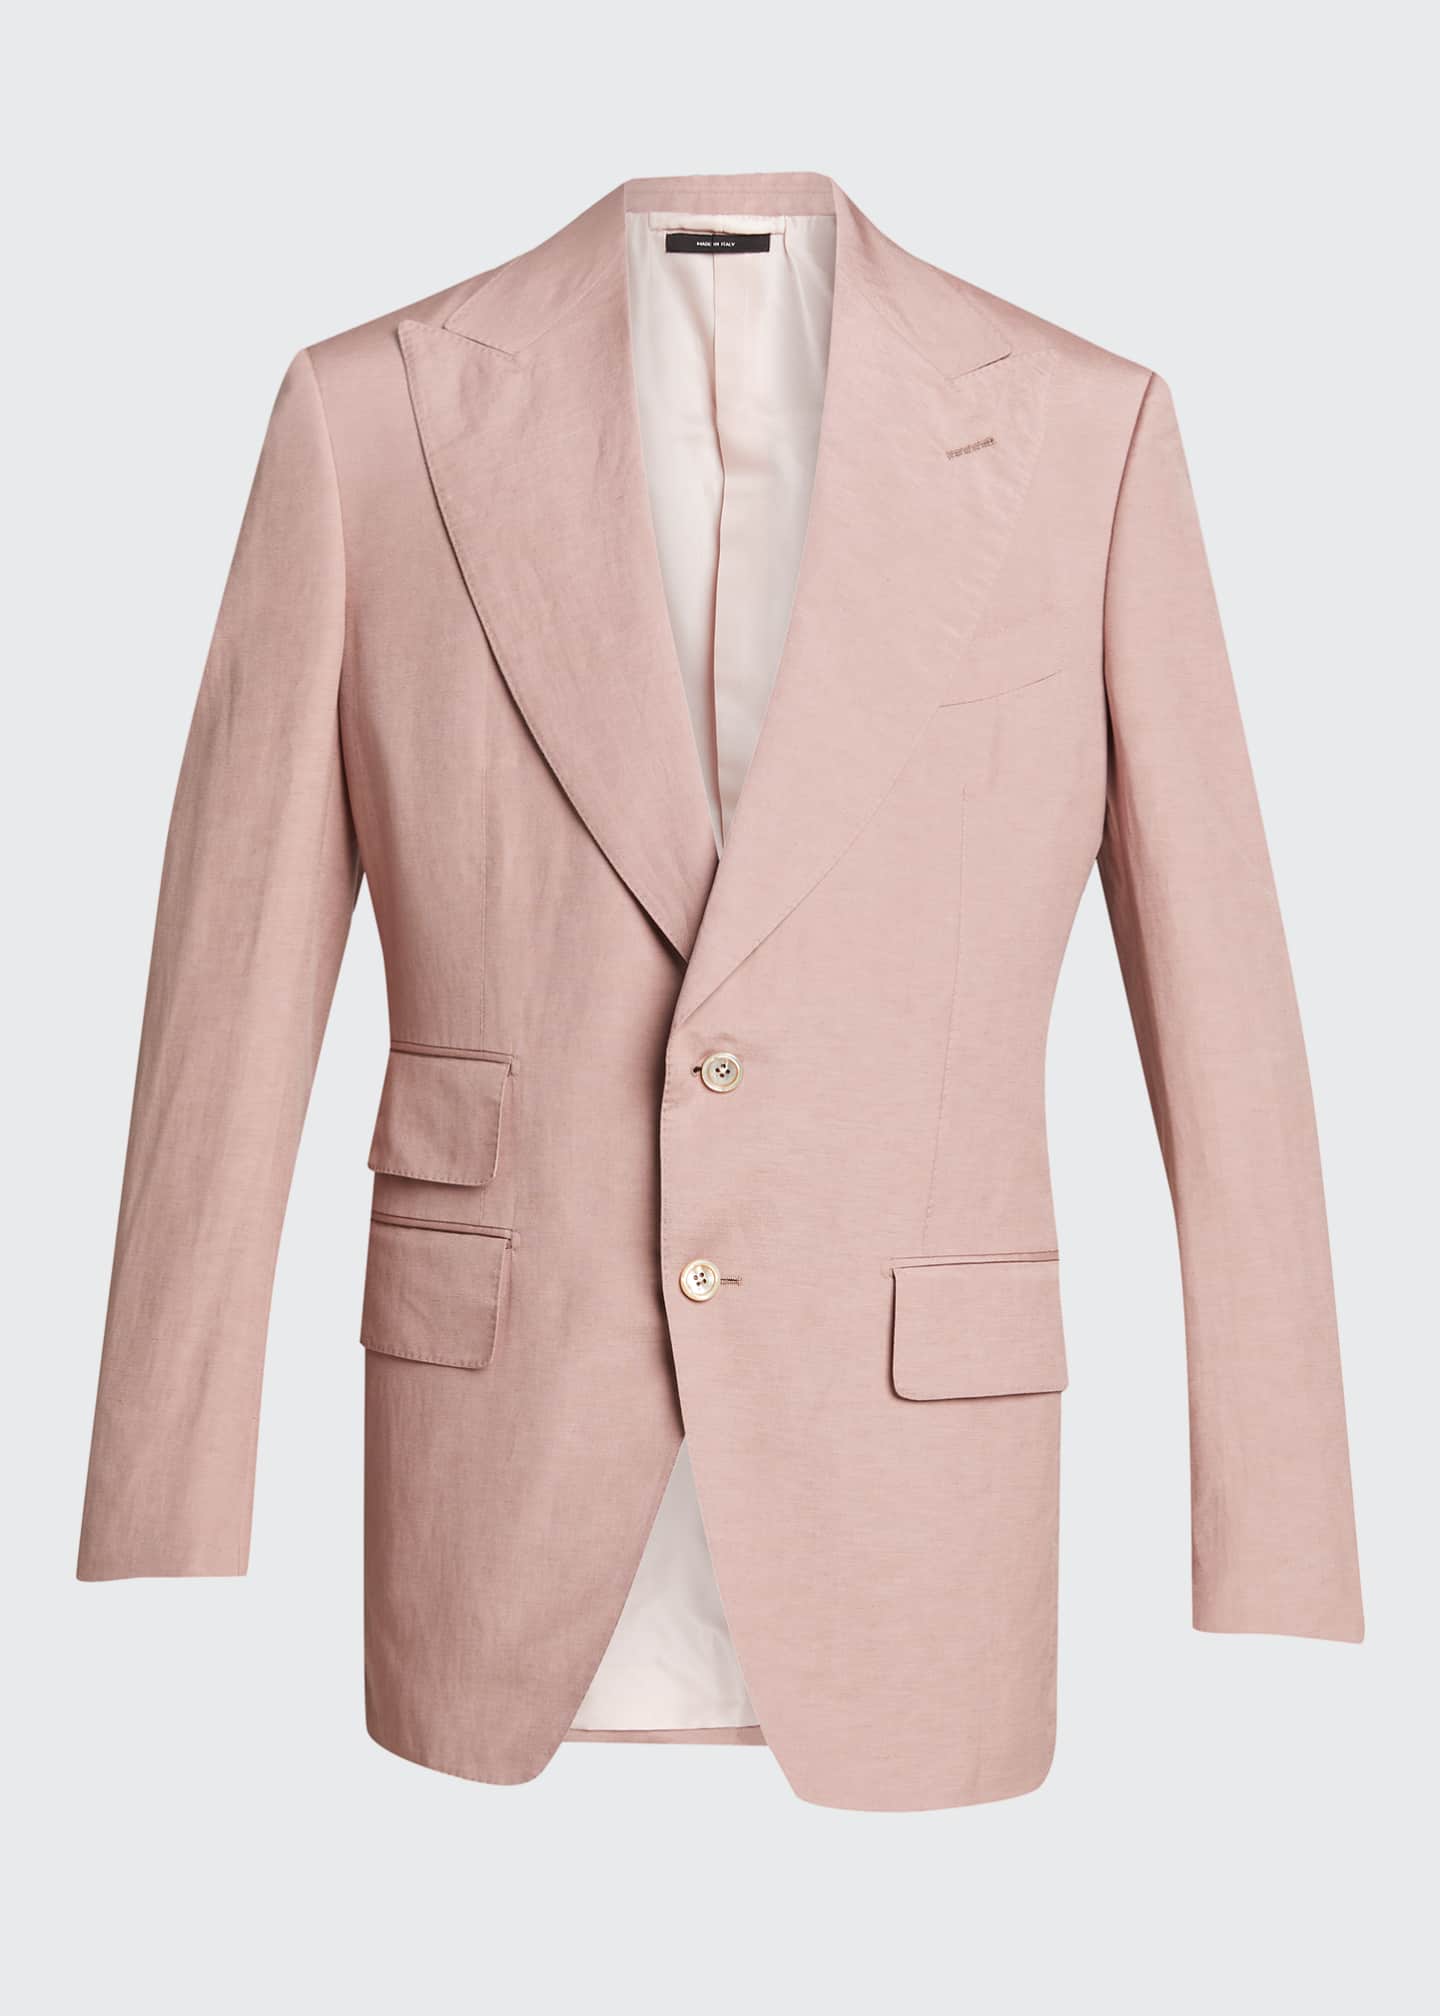 TOM FORD Men's Silk-Linen Two-Piece Day Suit - Bergdorf Goodman